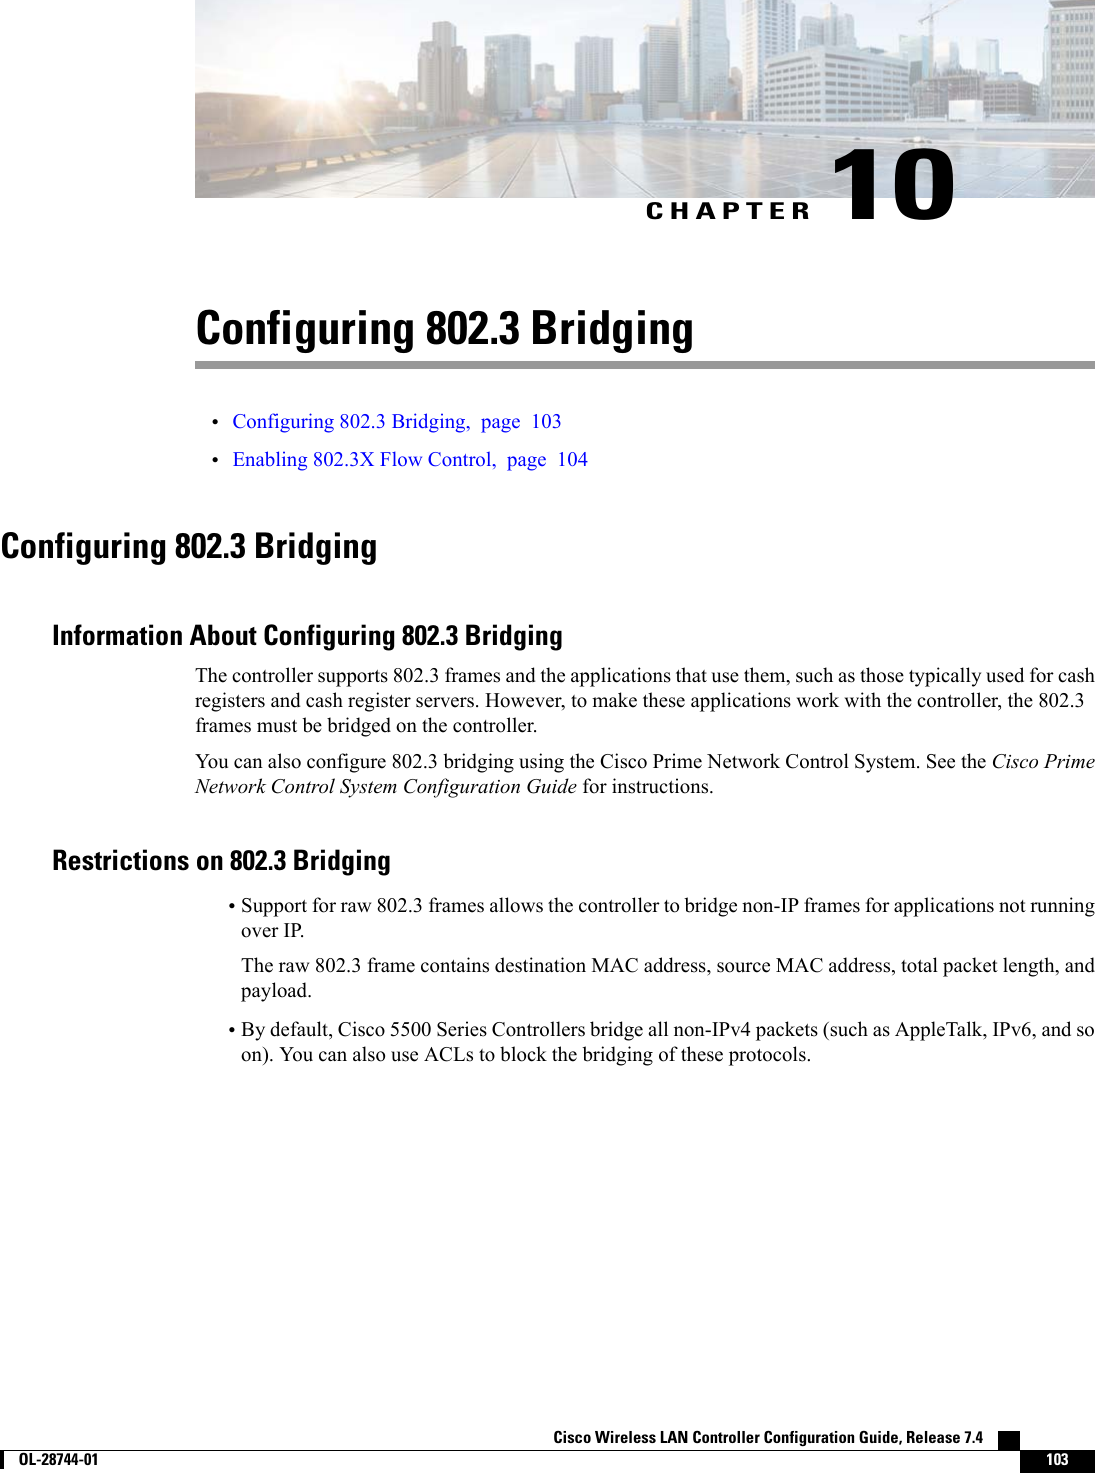 CHAPTER 10Configuring 802.3 Bridging•Configuring 802.3 Bridging, page 103•Enabling 802.3X Flow Control, page 104Configuring 802.3 BridgingInformation About Configuring 802.3 BridgingThe controller supports 802.3 frames and the applications that use them, such as those typically used for cashregisters and cash register servers. However, to make these applications work with the controller, the 802.3frames must be bridged on the controller.You can also configure 802.3 bridging using the Cisco Prime Network Control System. See the Cisco PrimeNetwork Control System Configuration Guide for instructions.Restrictions on 802.3 Bridging•Support for raw 802.3 frames allows the controller to bridge non-IP frames for applications not runningover IP.The raw 802.3 frame contains destination MAC address, source MAC address, total packet length, andpayload.•By default, Cisco 5500 Series Controllers bridge all non-IPv4 packets (such as AppleTalk, IPv6, and soon). You can also use ACLs to block the bridging of these protocols.Cisco Wireless LAN Controller Configuration Guide, Release 7.4        OL-28744-01 103